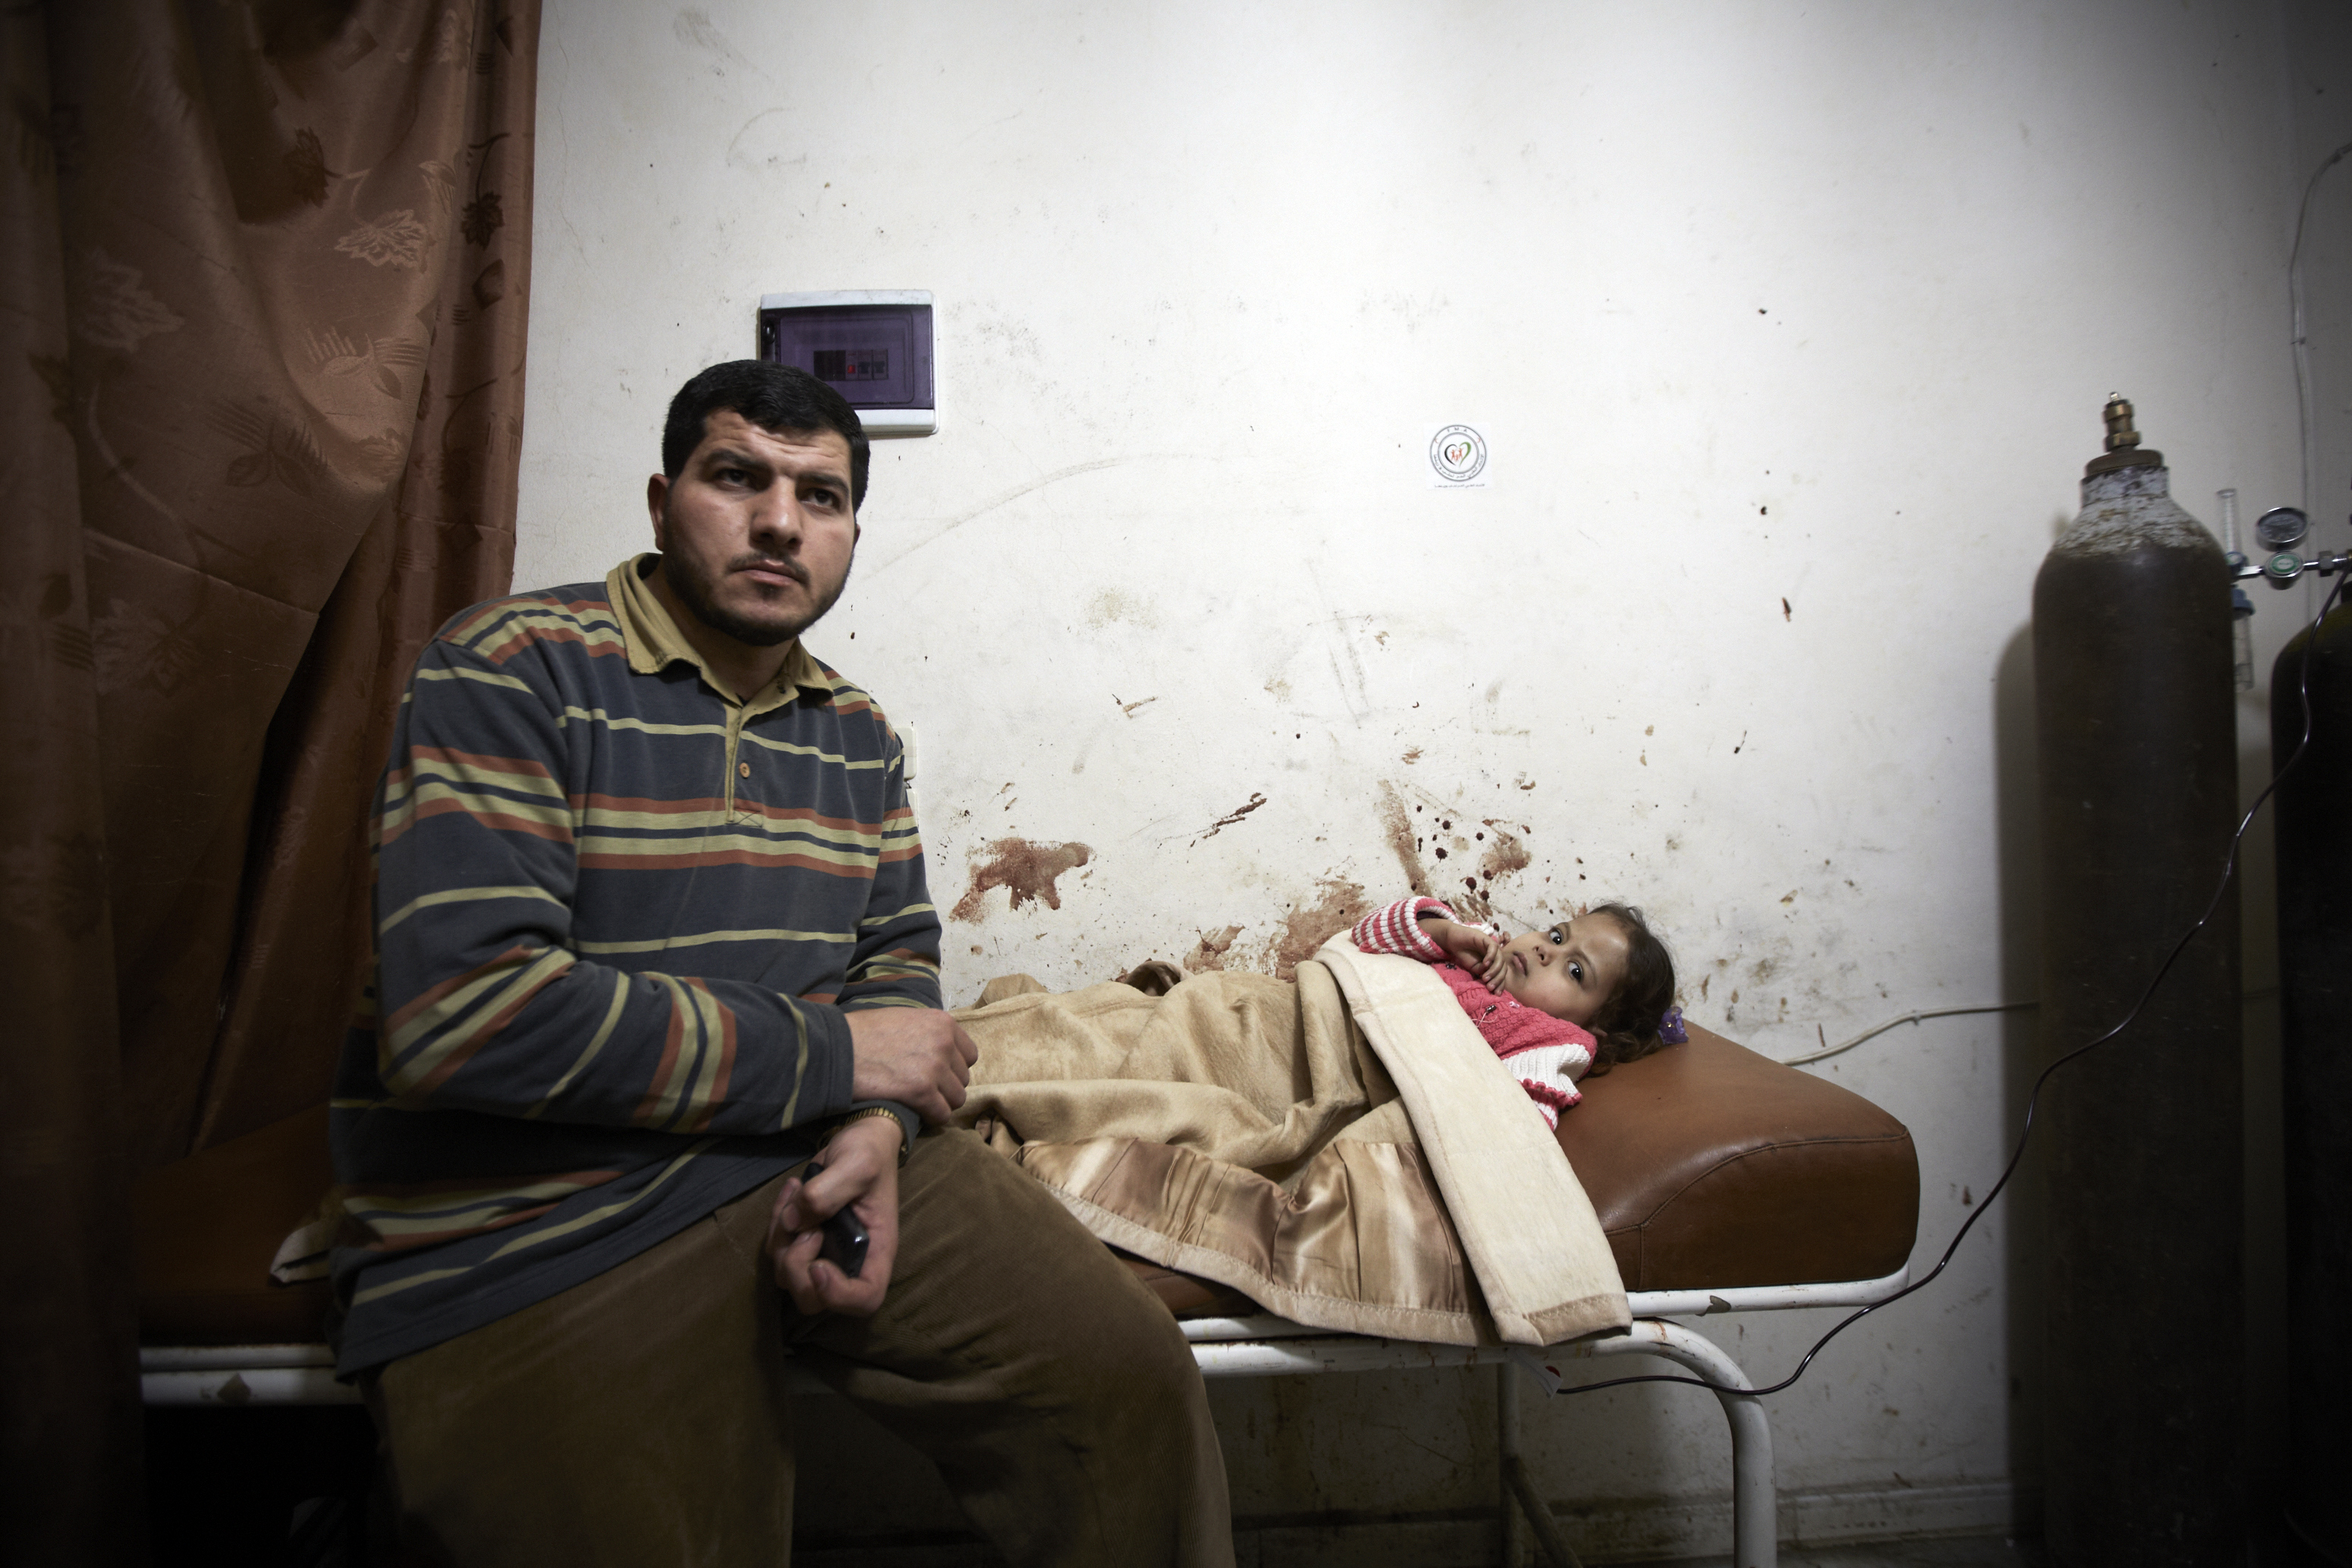 A wounded child is treated in a make shift hospital in Aleppo after her home was randomly targeted by the regime's artillery, on March 15, 2013.